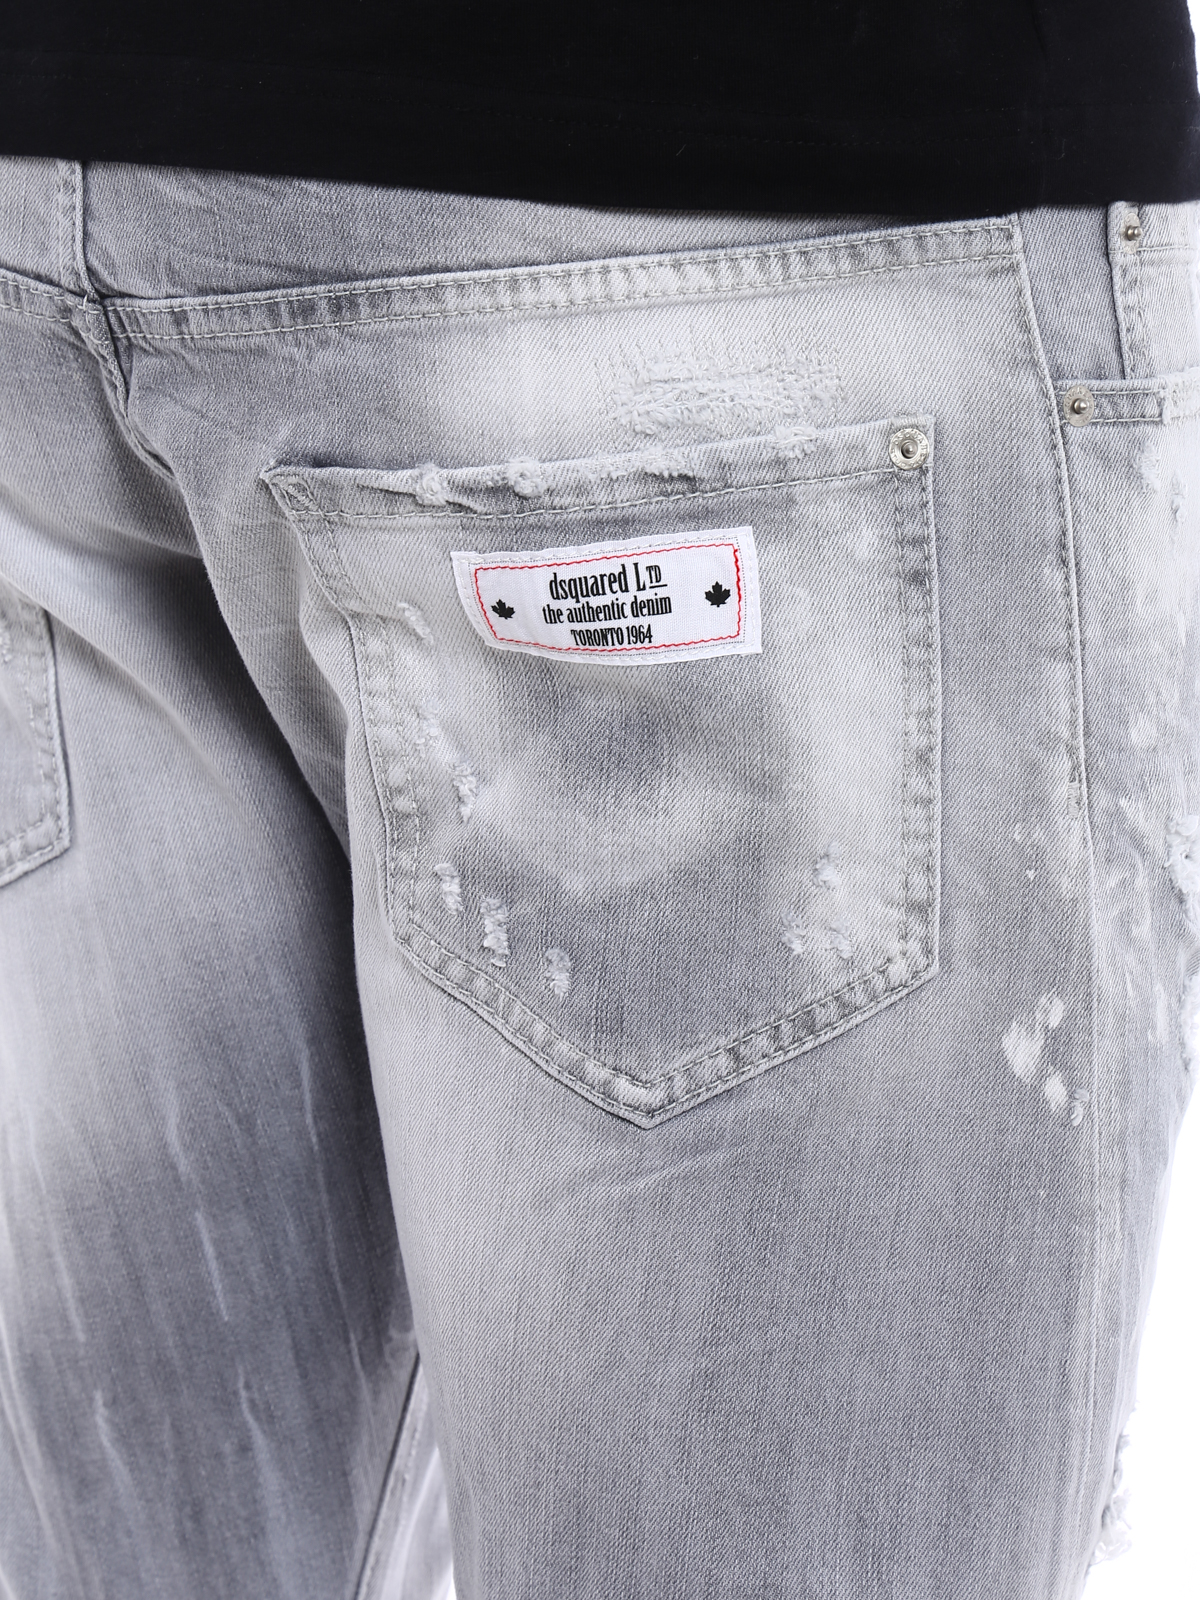 dsquared jeans buy online